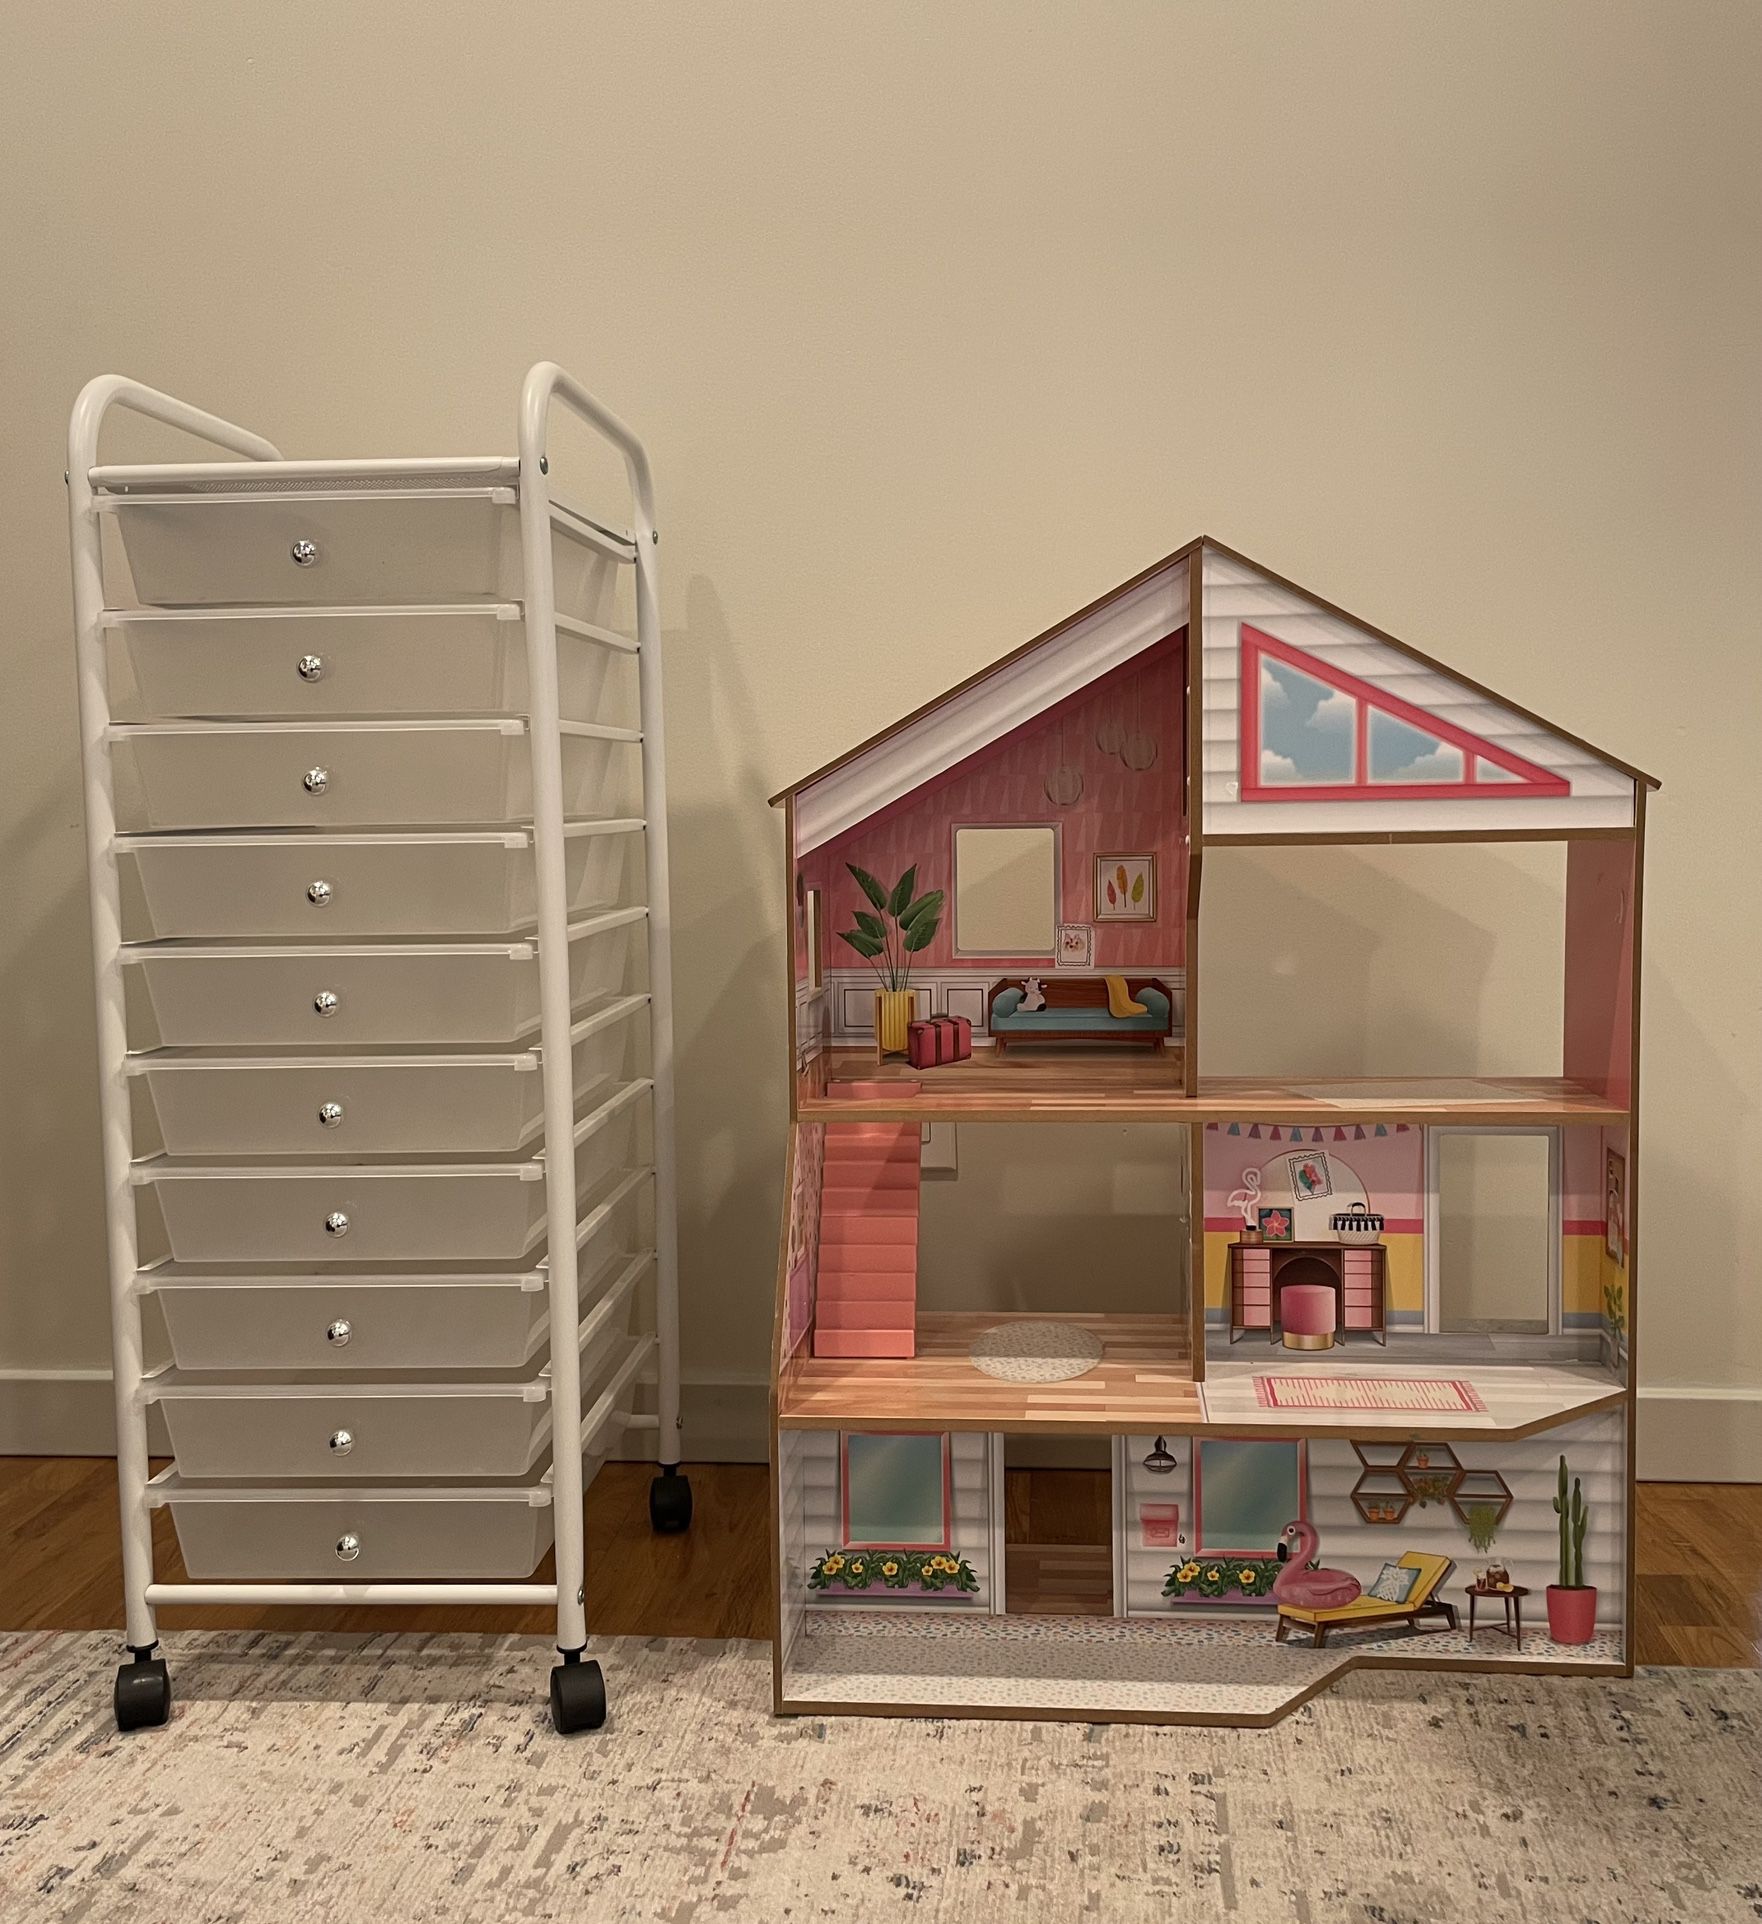 10-Drawer White Rolling Cart And KidKraft Dollhouse